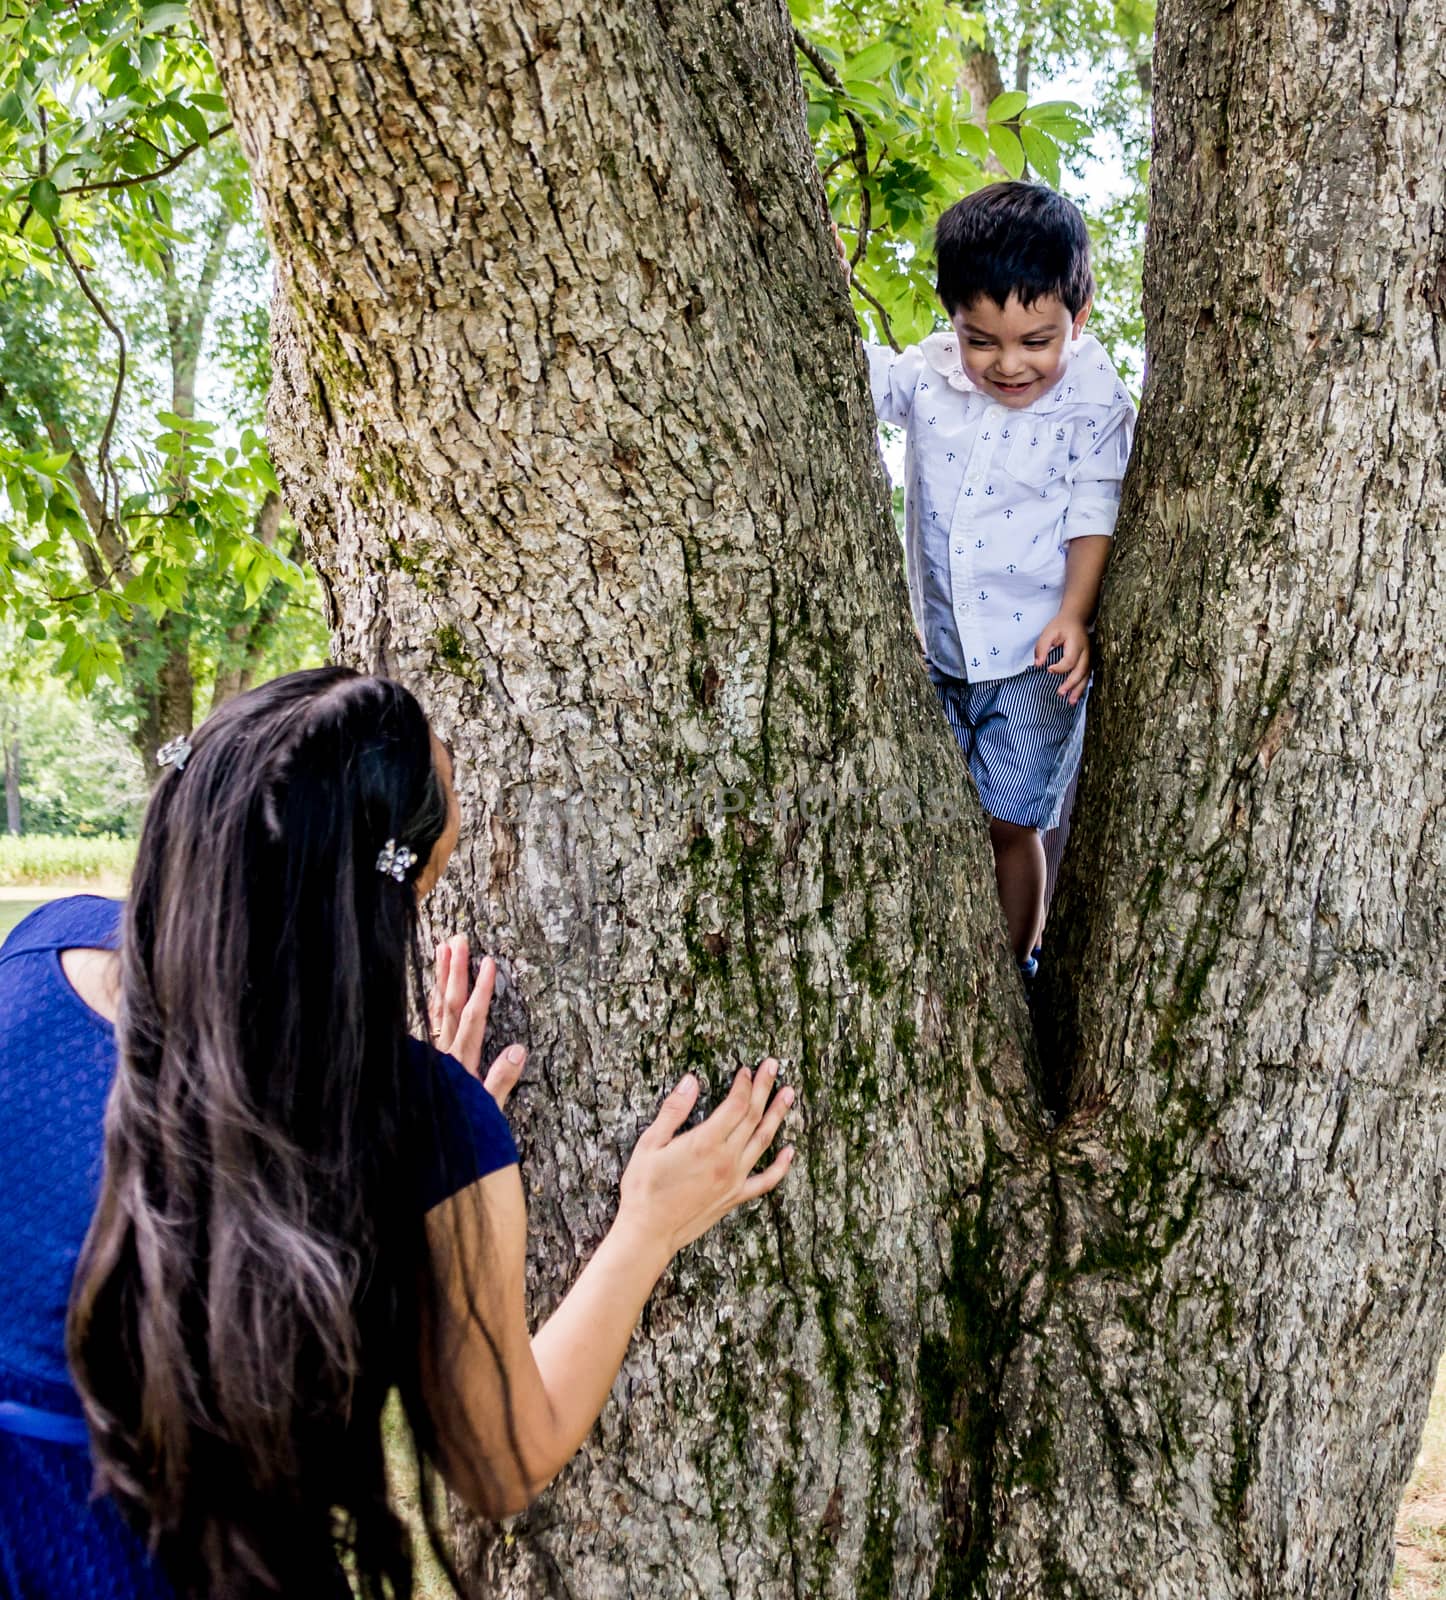 Latino mother and son at a tree. Mother is looking at the child with her back to the camera and child is standing in the V of a tree trunk looking down at mother with a smile on his face.